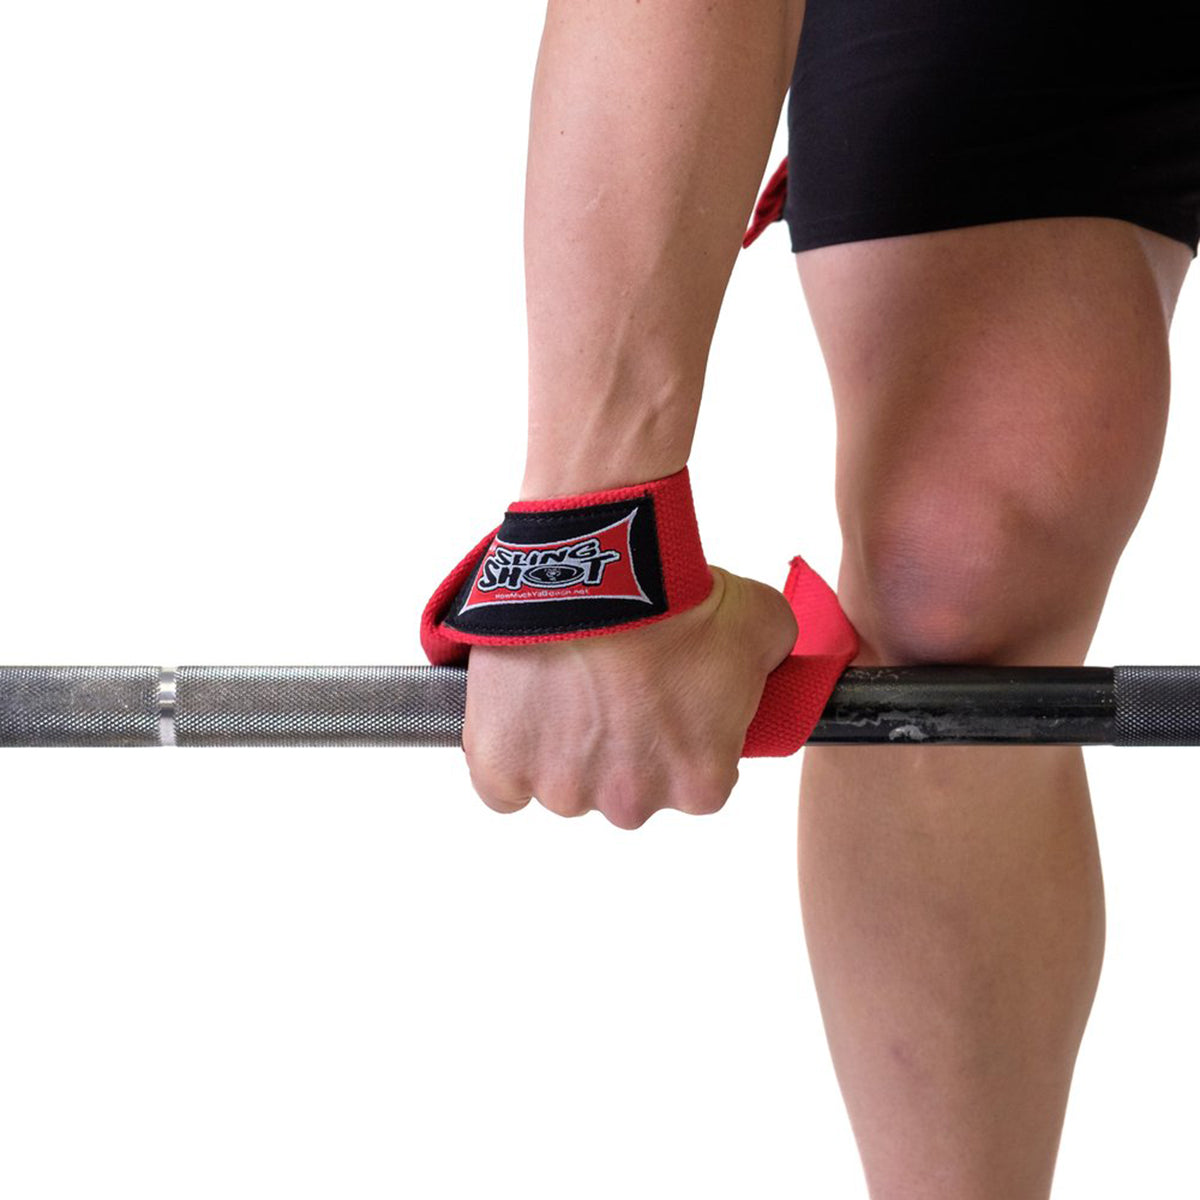 Sling Shot Heavy Duty Weight Lifting Straps by Mark Bell Sling Shot